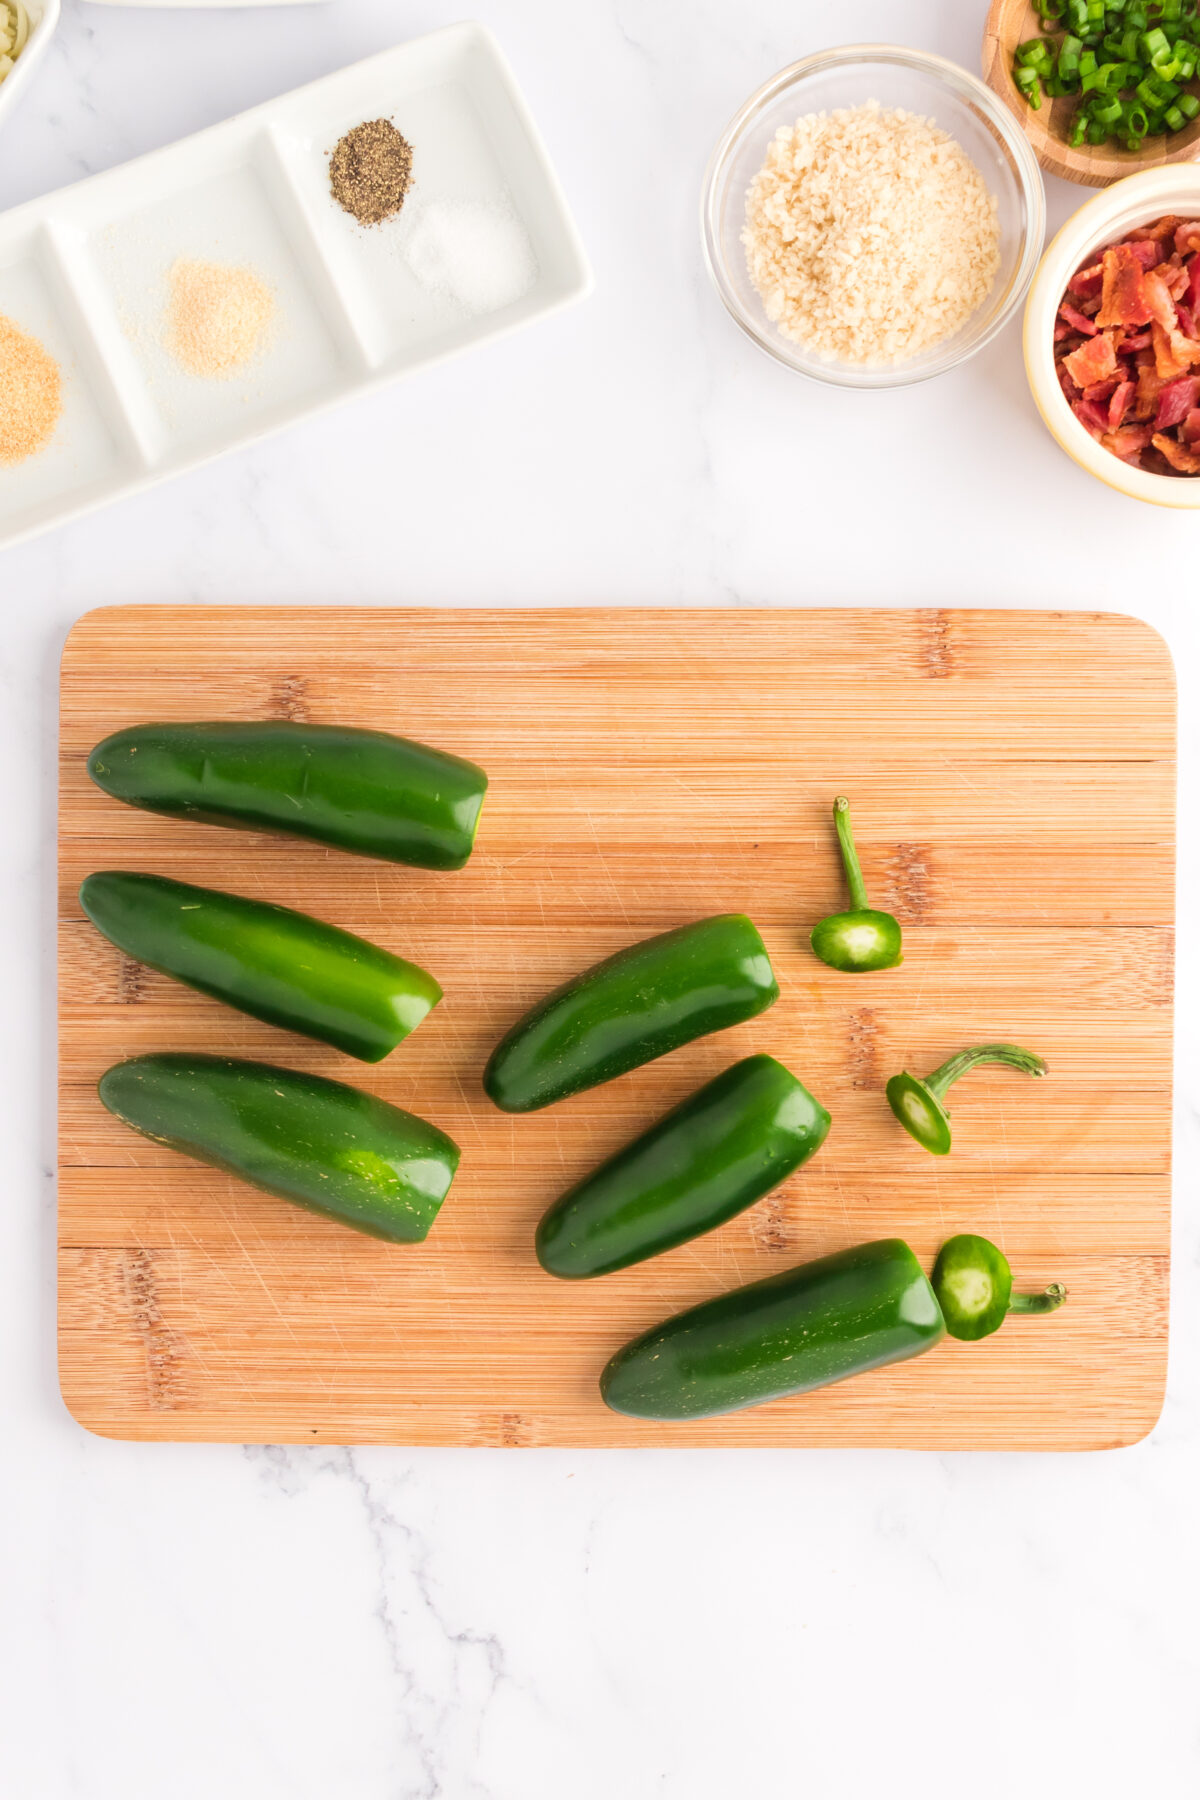 Jalapeno peppers on a cutting board with the tops cut off.